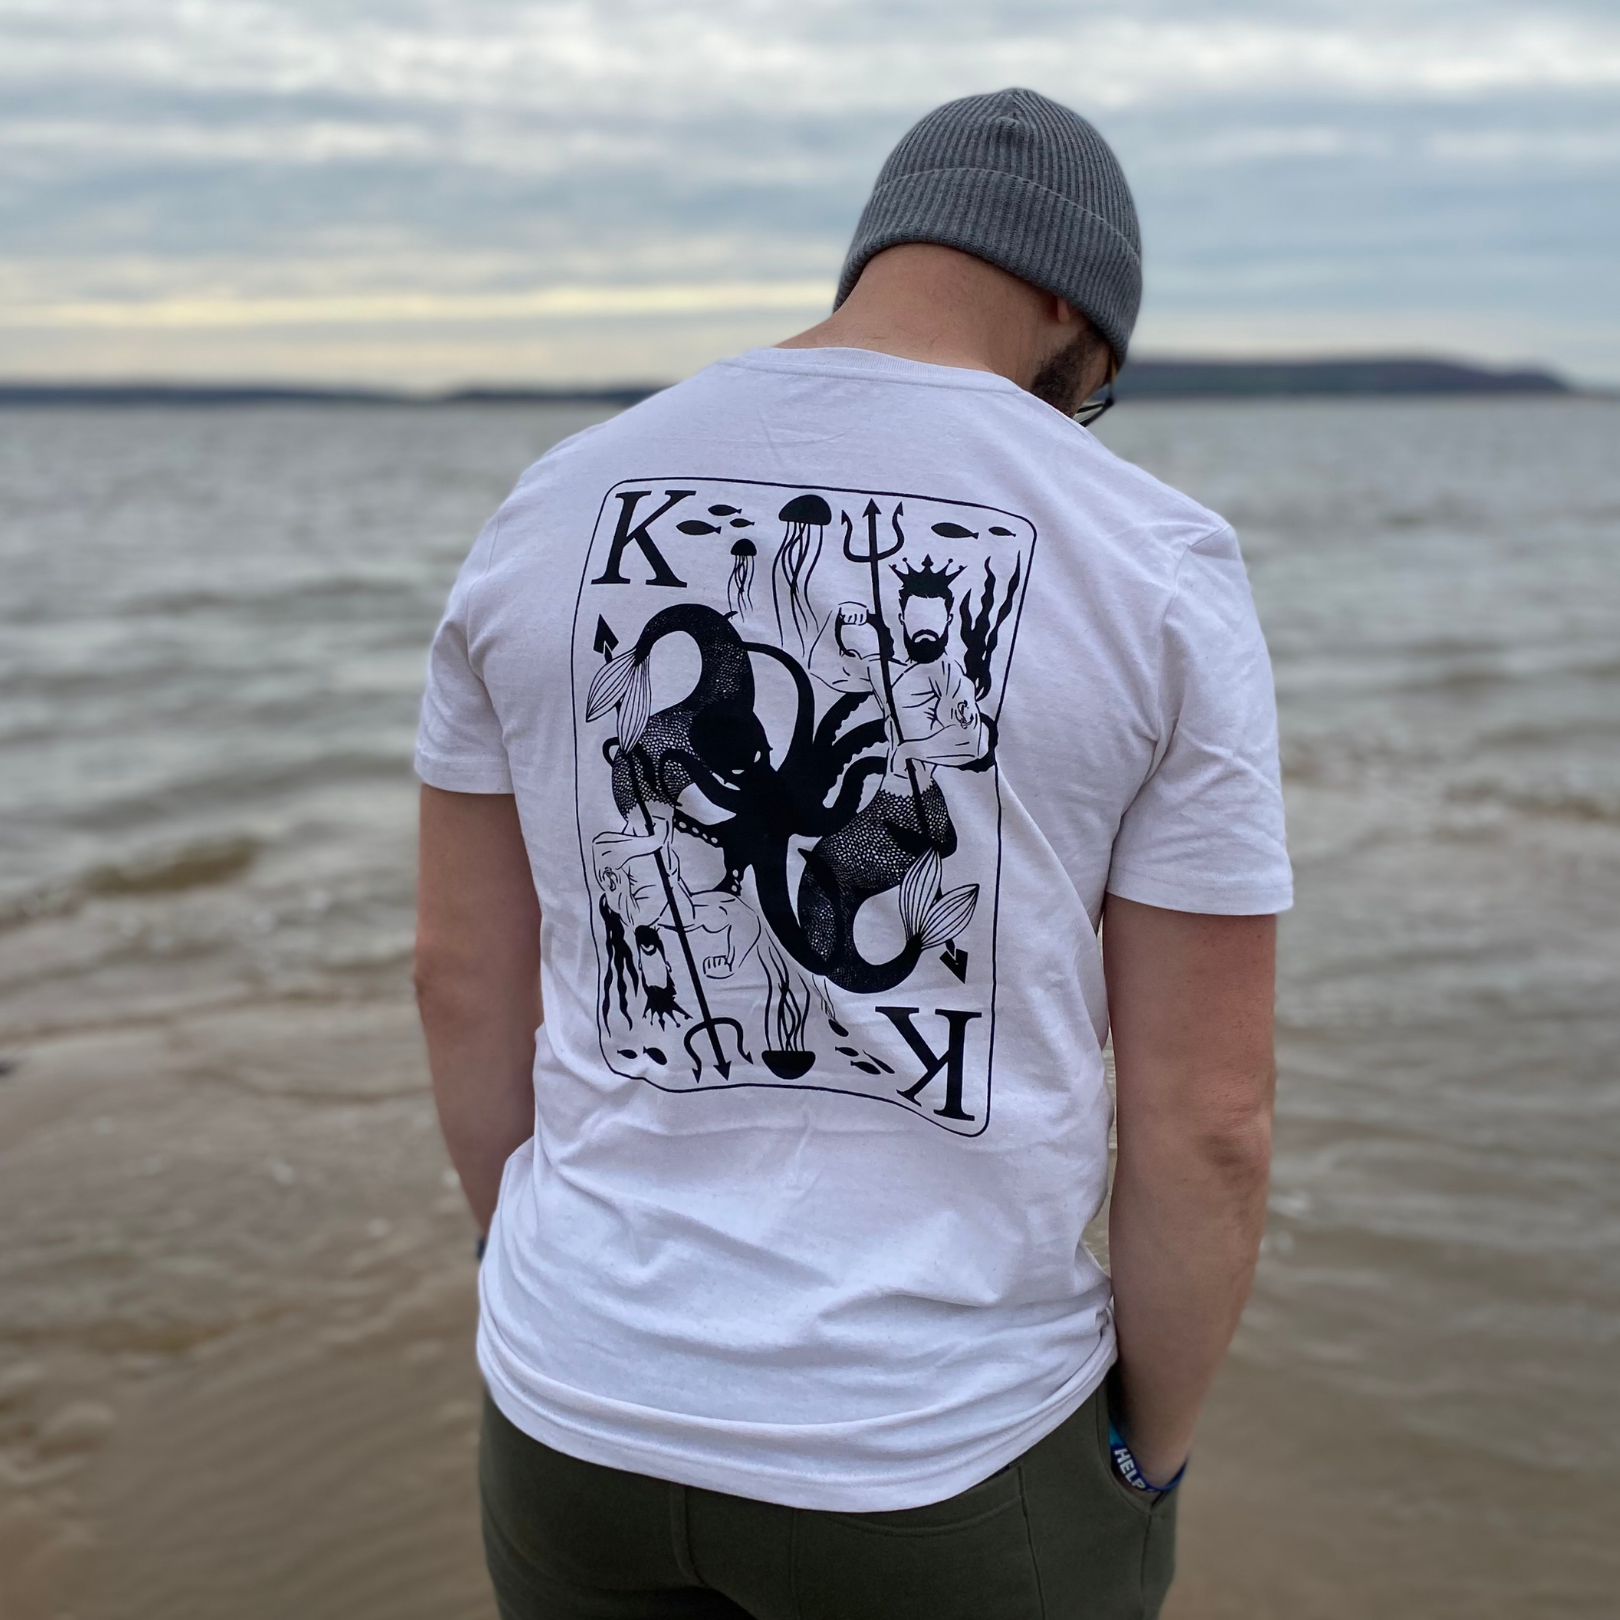 The KING OF THE OCEAN shirt